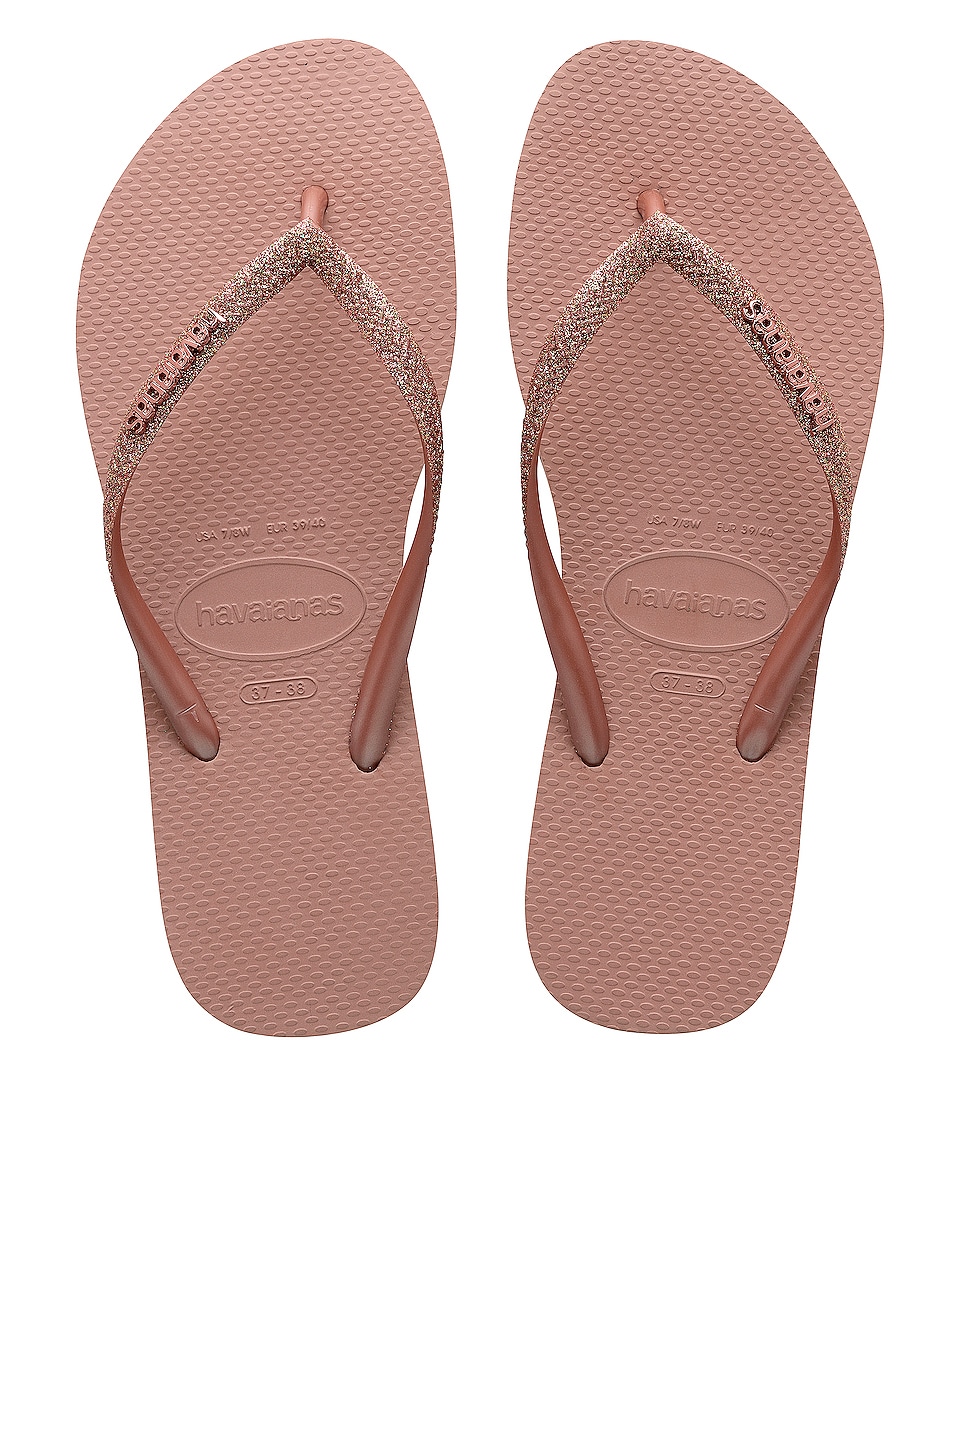 black and rose gold havaianas